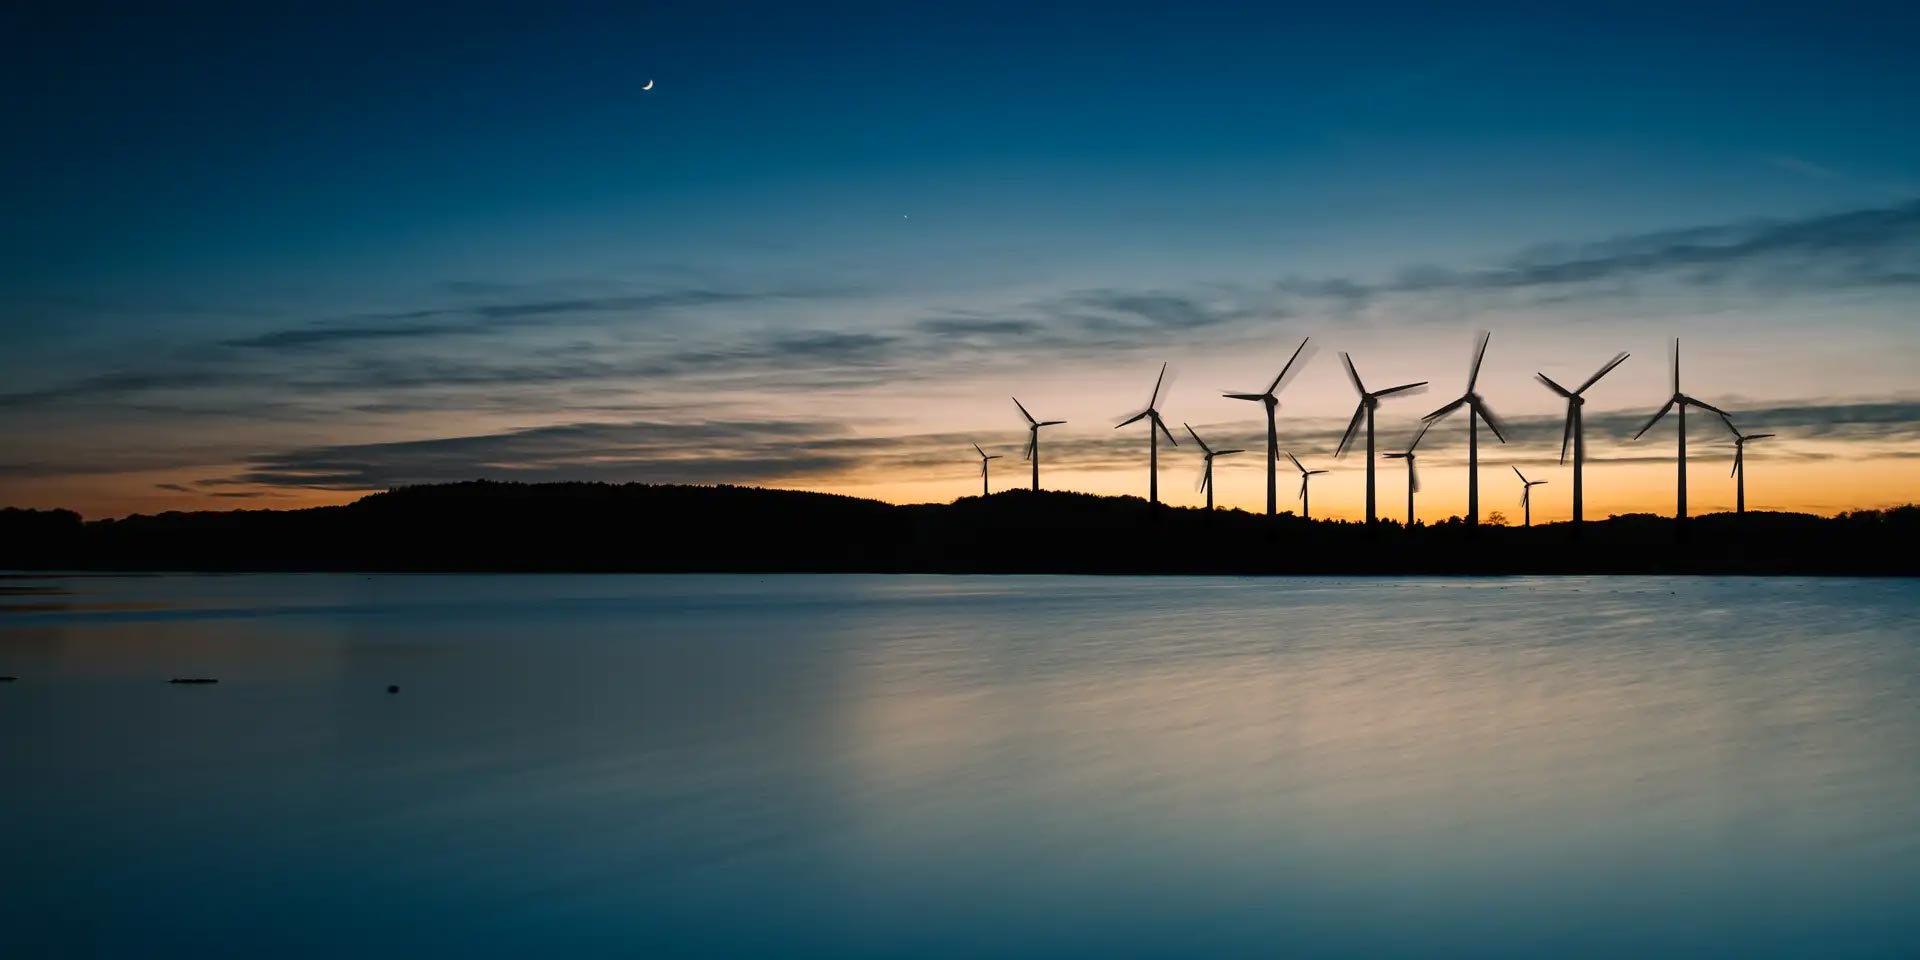 Wind farm with beautiful sunset by the water